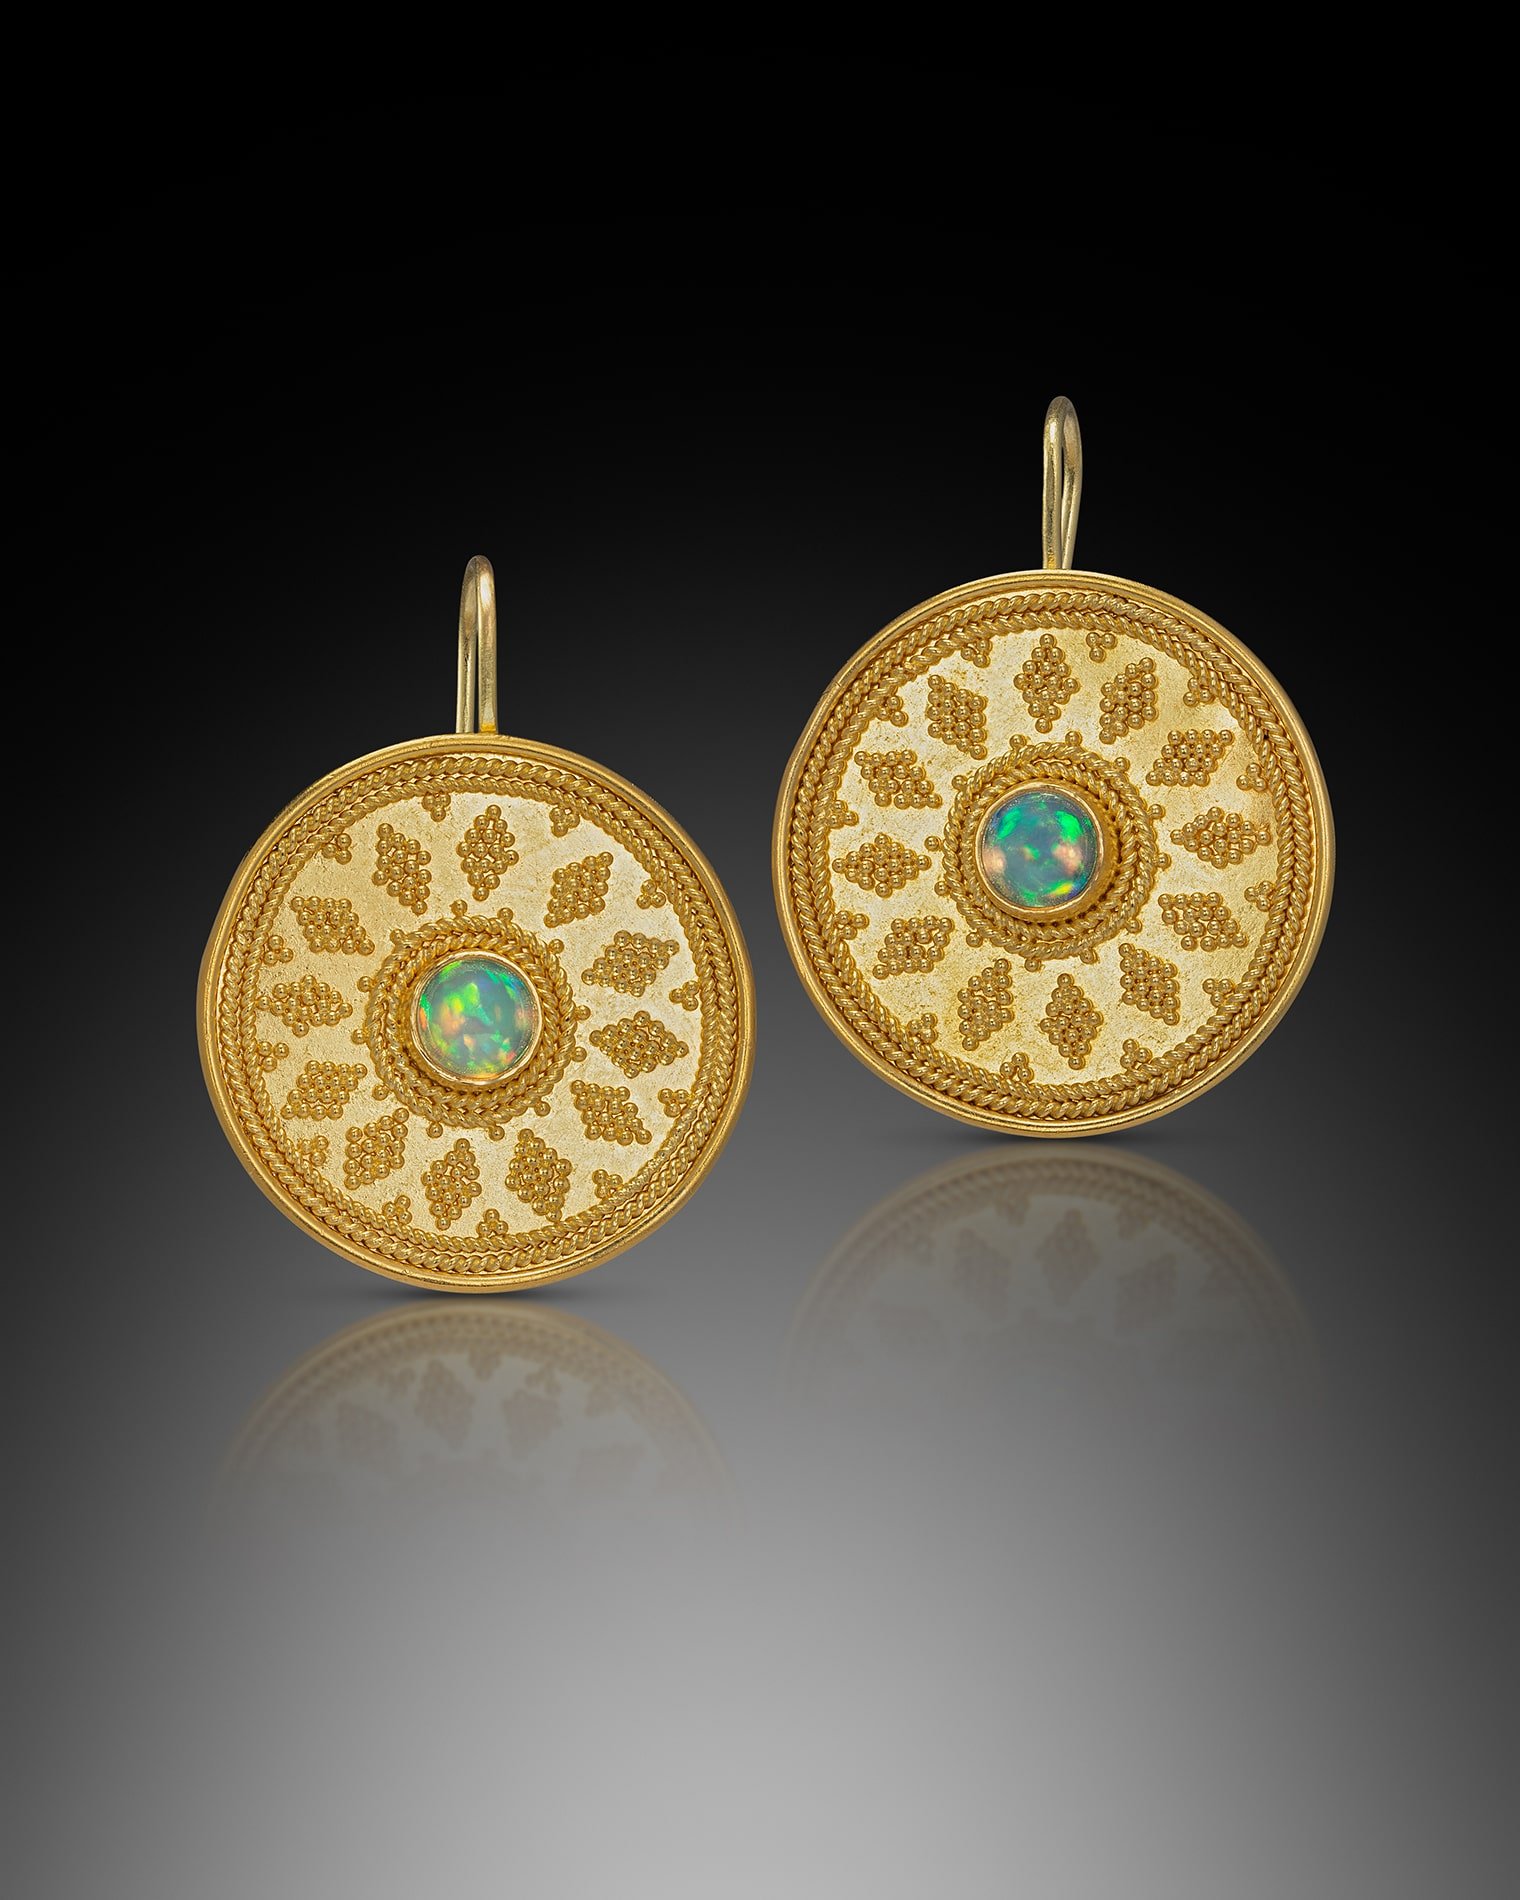 Classical Earrings.  These earrings are hand fabricated, fused, and granulated in 22k gold; set with two Ethiopian opals.